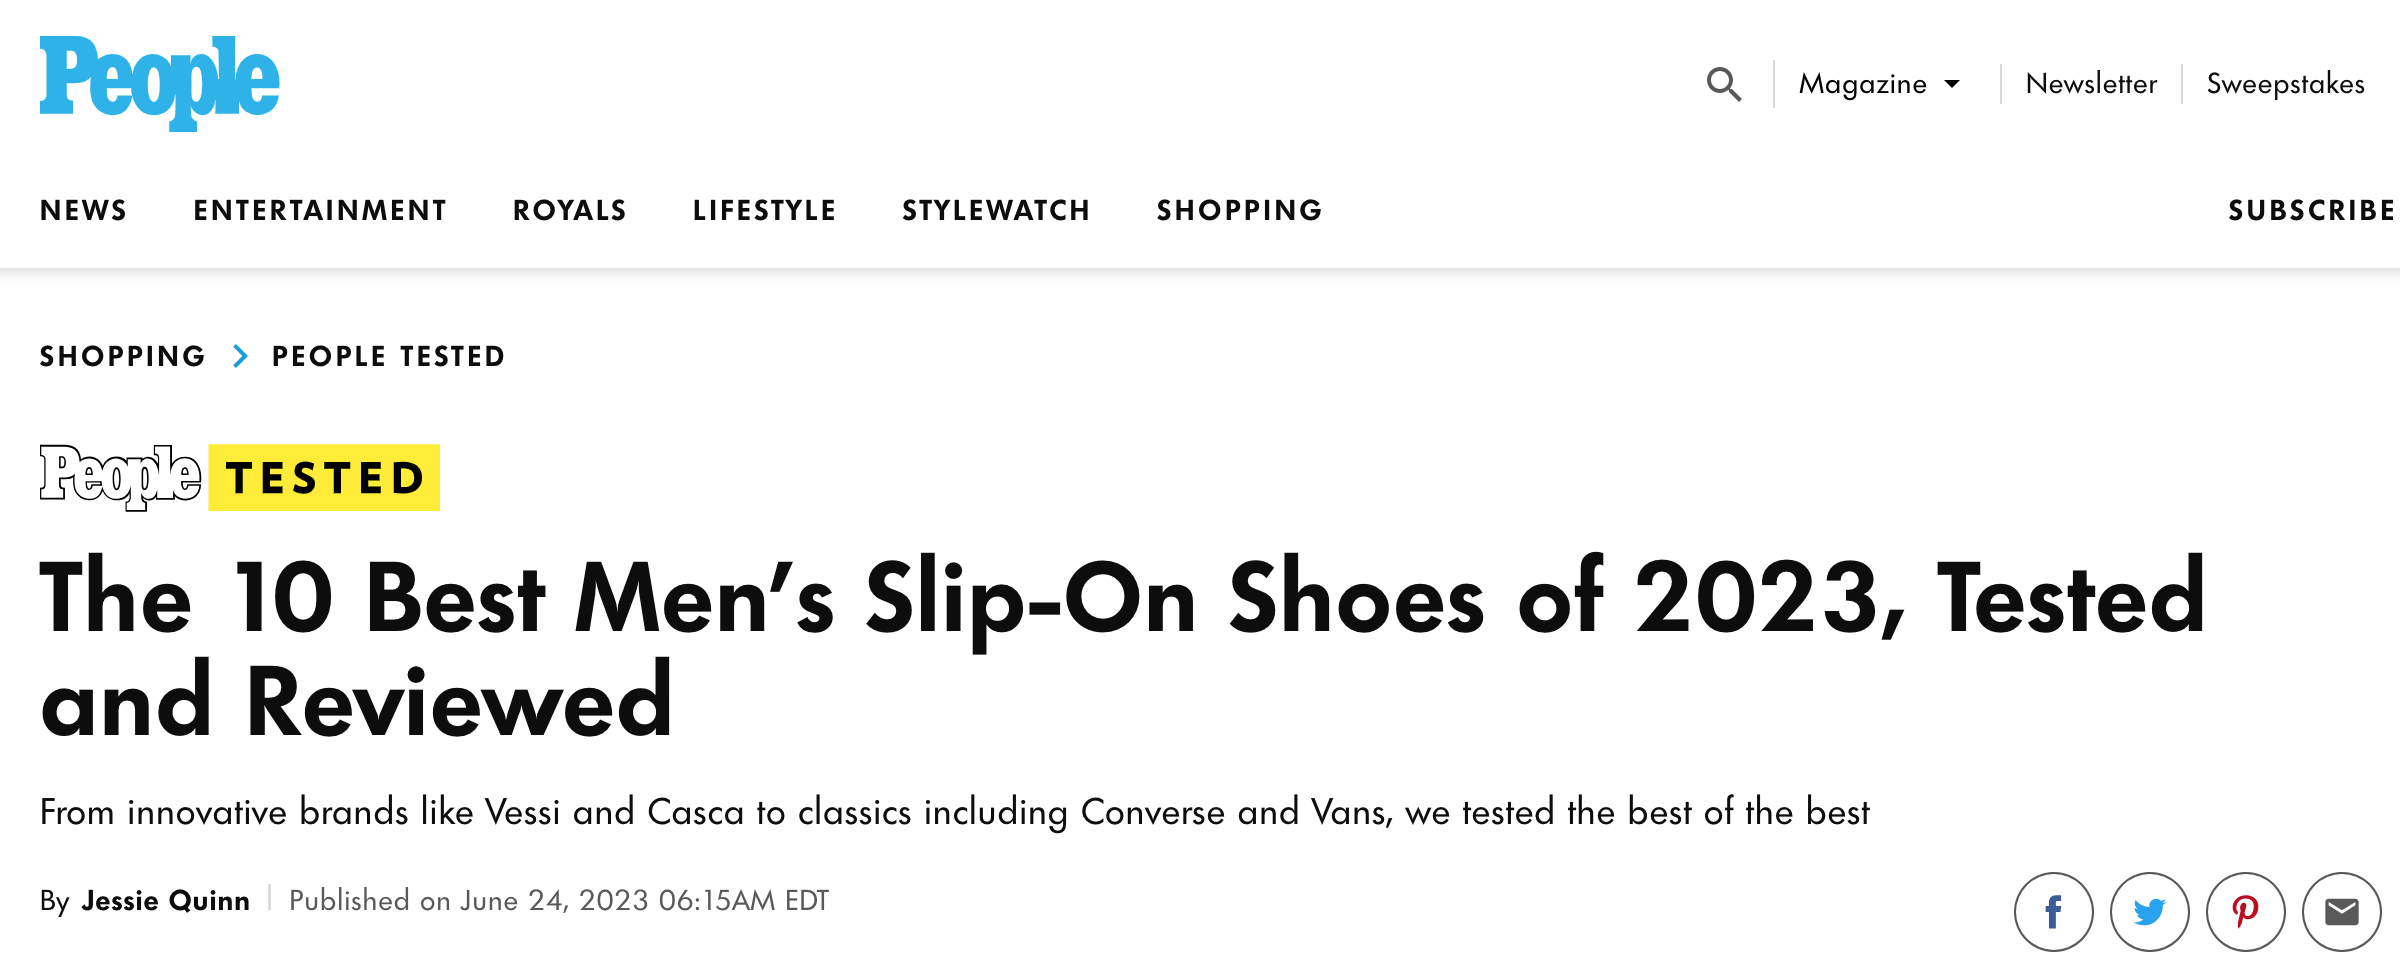 People The 10 Best Men’s Slip-On Shoes of 2023, Tested and Reviewed